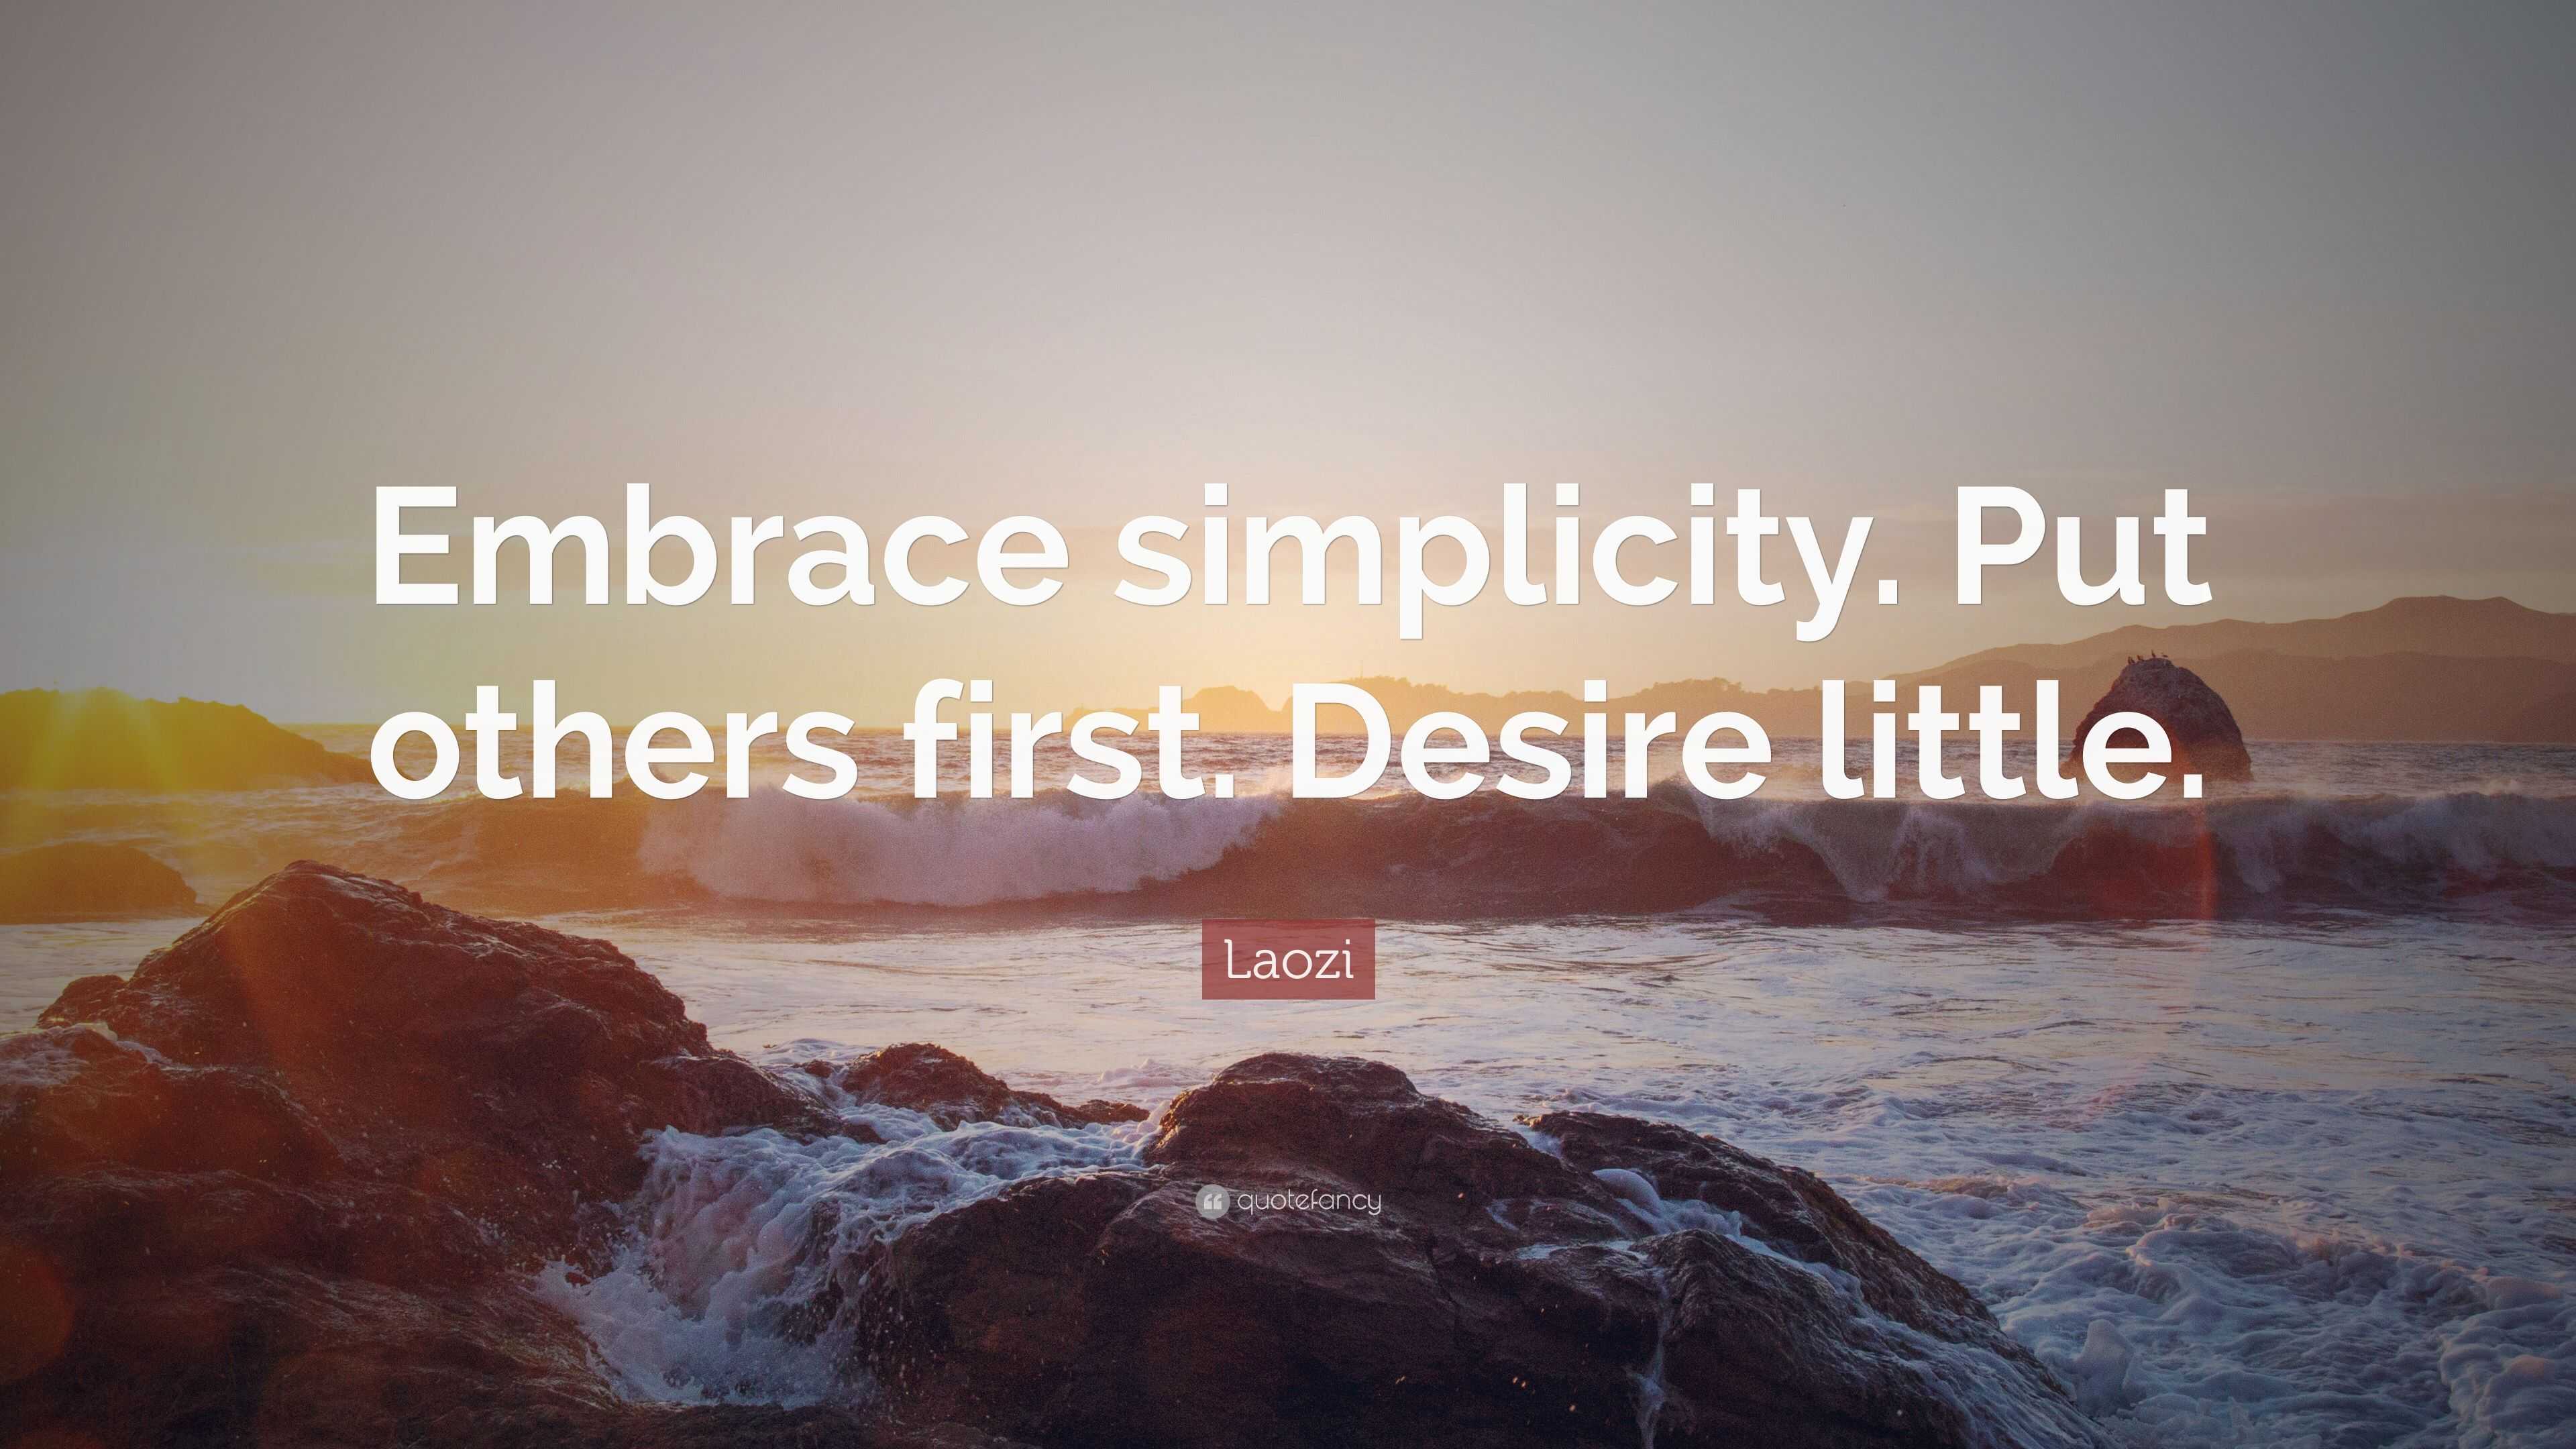 Laozi quote: Embrace simplicity. Put others first. Desire little.